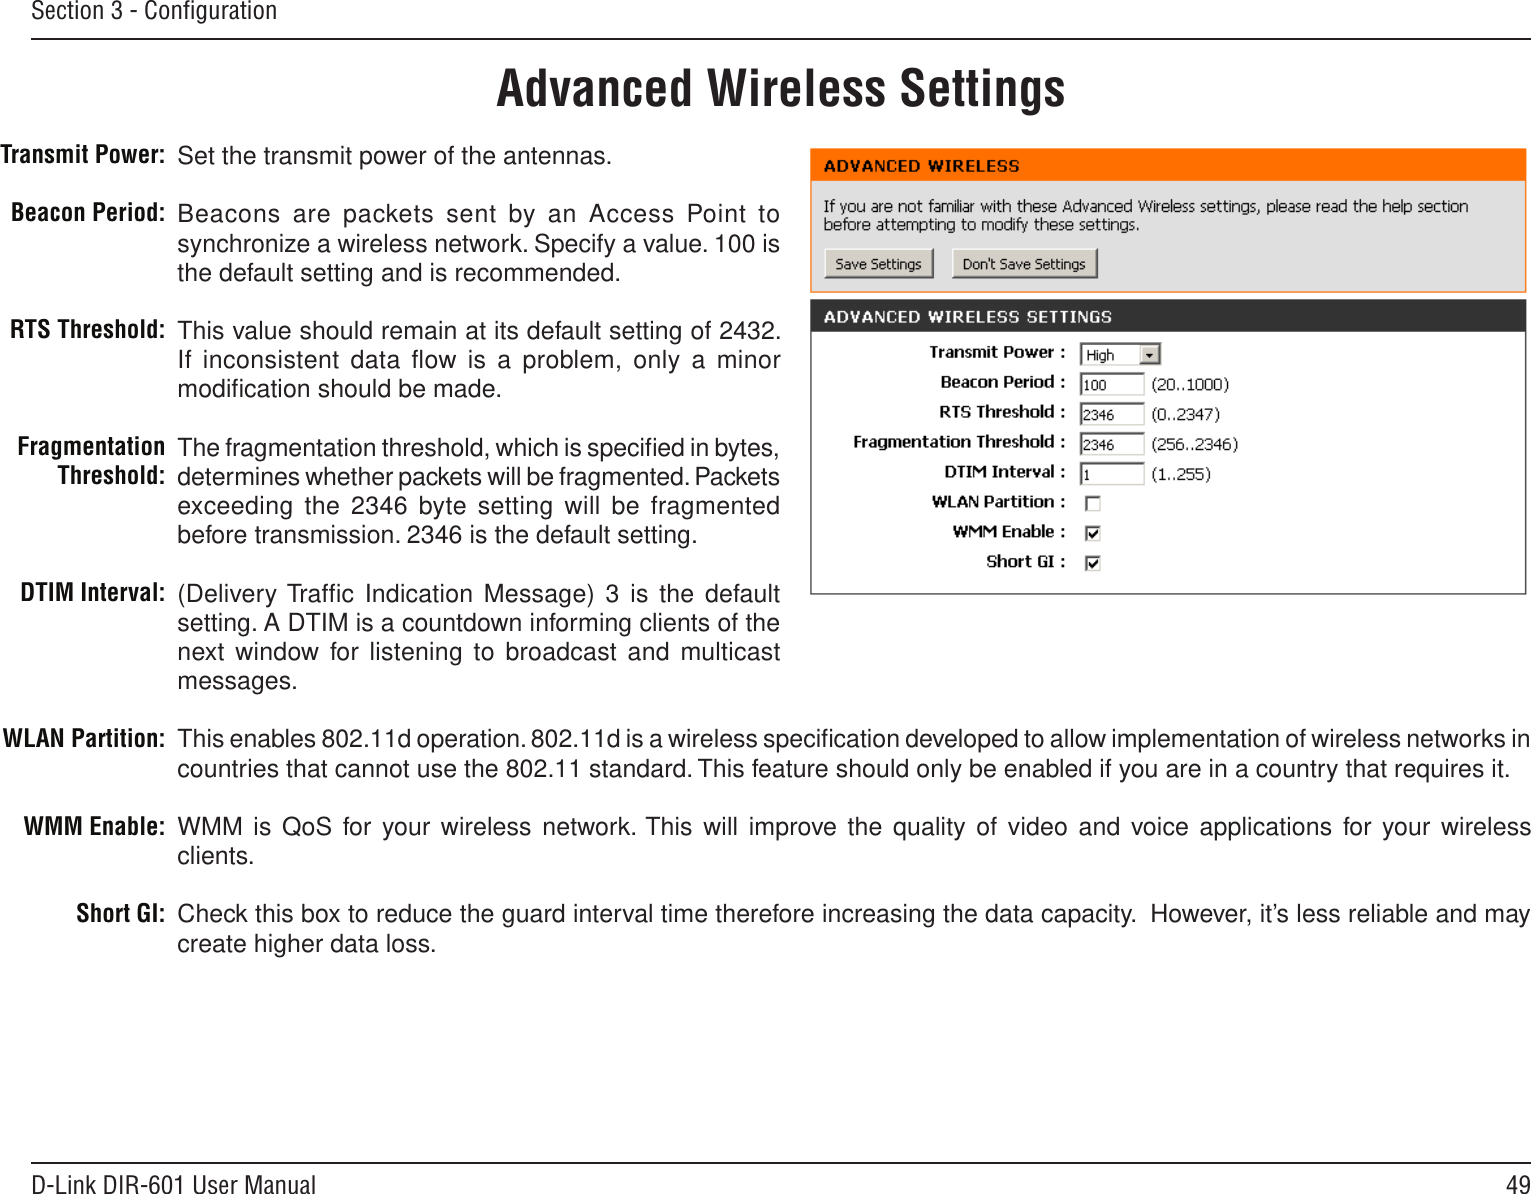 49D-Link DIR-601 User ManualSection 3 - ConﬁgurationSet the transmit power of the antennas.Beacons are packets sent by an  Access Point to synchronize a wireless network. Specify a value. 100 is the default setting and is recommended. This value should remain at its default setting of 2432. If inconsistent data ﬂow is a problem, only a minor modiﬁcation should be made.The fragmentation threshold, which is speciﬁed in bytes, determines whether packets will be fragmented. Packets exceeding the 2346 byte setting will be fragmented before transmission. 2346 is the default setting. (Delivery Trafﬁc  Indication Message) 3  is  the default setting. A DTIM is a countdown informing clients of the next window for listening to  broadcast and multicast messages.This enables 802.11d operation. 802.11d is a wireless speciﬁcation developed to allow implementation of wireless networks in countries that cannot use the 802.11 standard. This feature should only be enabled if you are in a country that requires it.WMM is QoS for your wireless network. This will improve the quality  of video and voice applications for your wireless clients.Check this box to reduce the guard interval time therefore increasing the data capacity.  However, it’s less reliable and may create higher data loss.Transmit Power:Beacon Period:RTS Threshold:Fragmentation Threshold:DTIM Interval:WLAN Partition:WMM Enable:Short GI:Advanced Wireless Settings